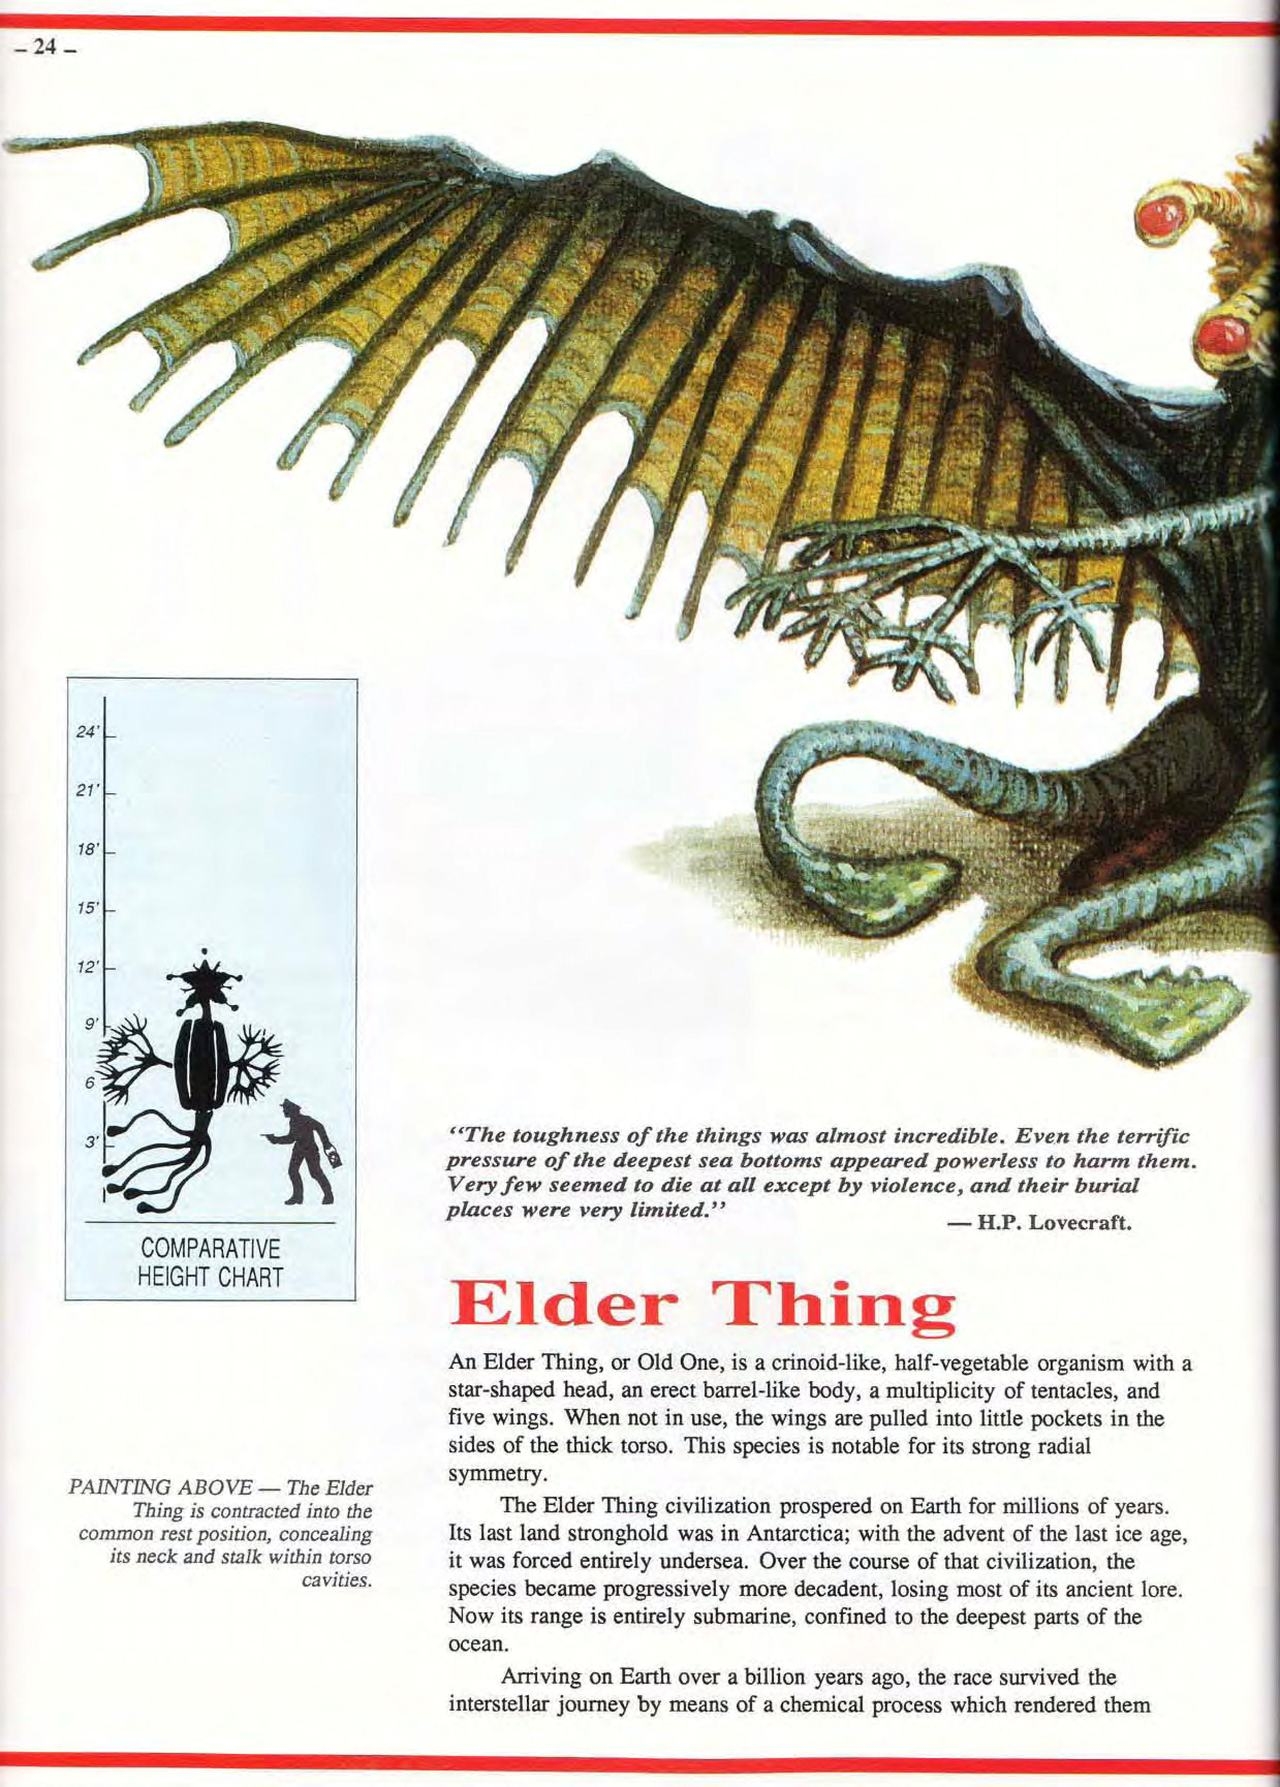 S. Petersen's Field Guide to Cthulhu Monsters 23